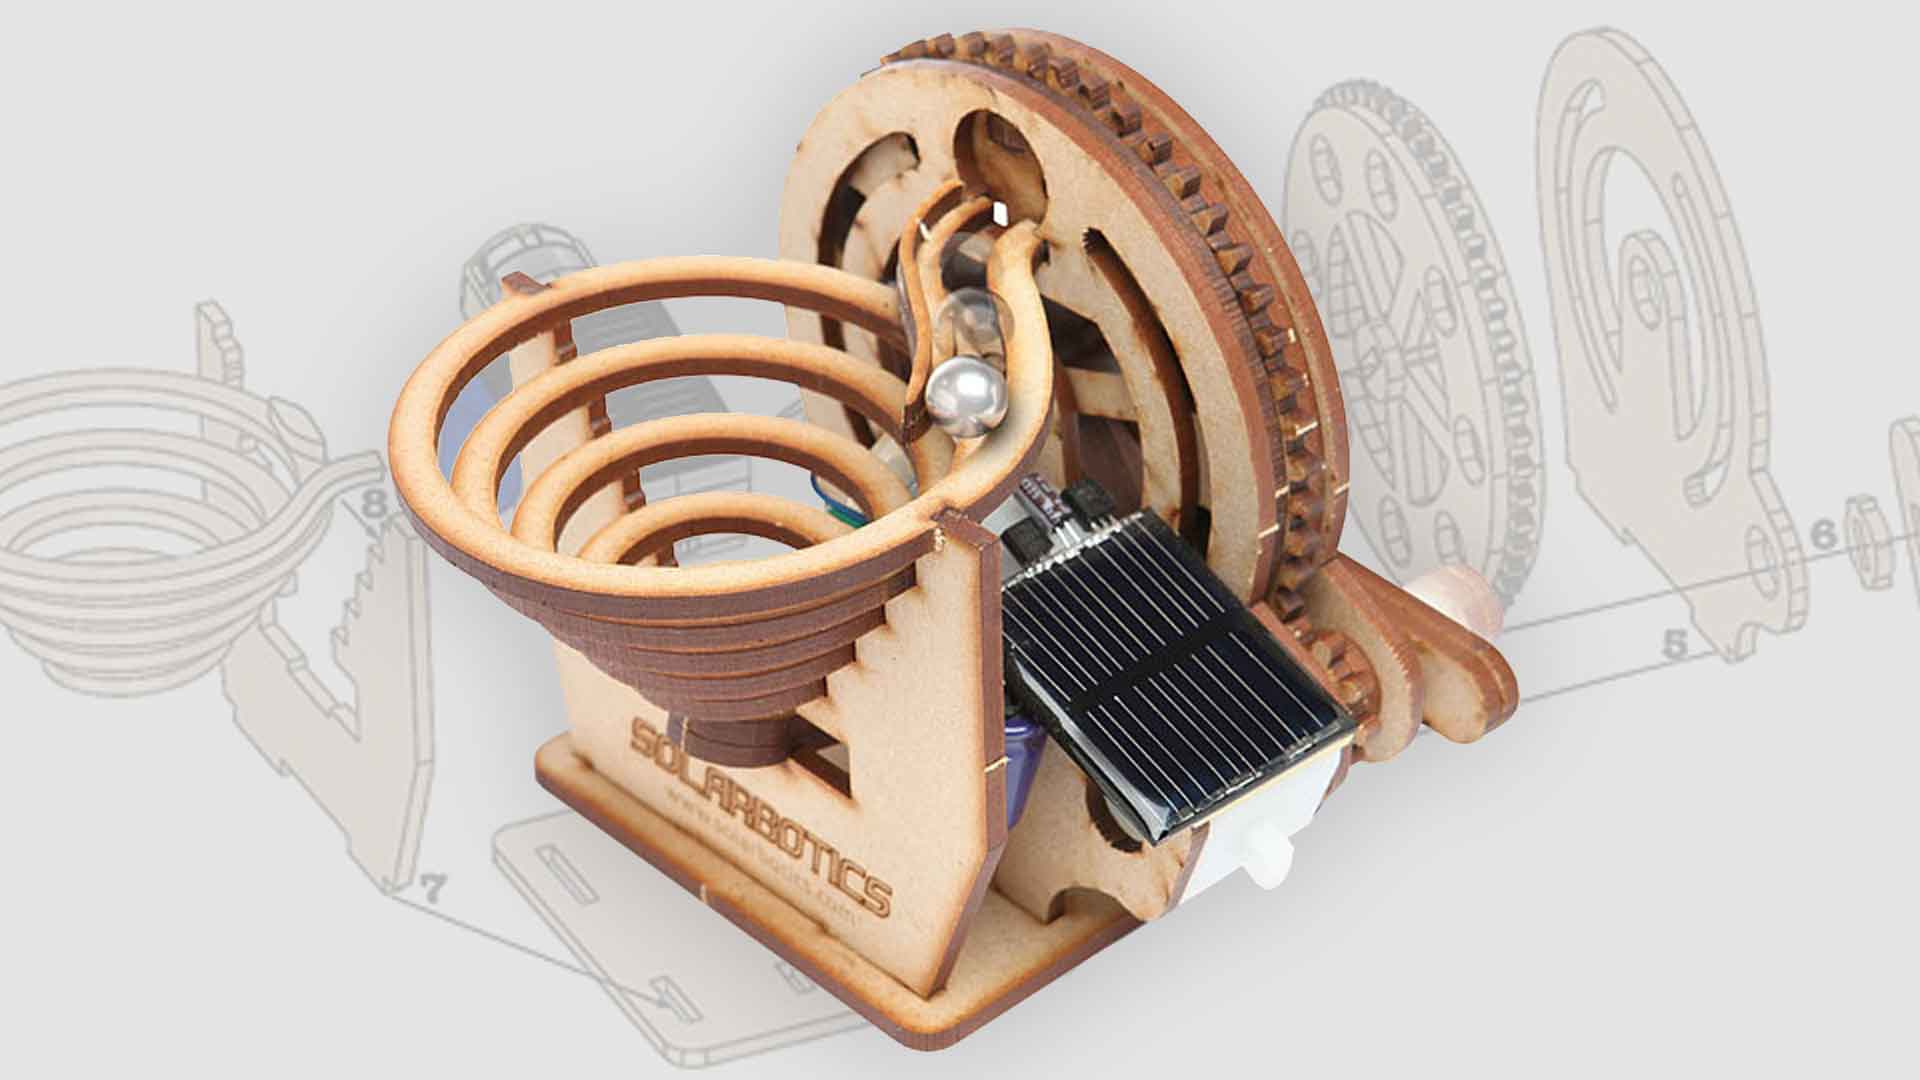 Wow Your Coworkers with The Solarbotics Perpetual Motion Marble Kit